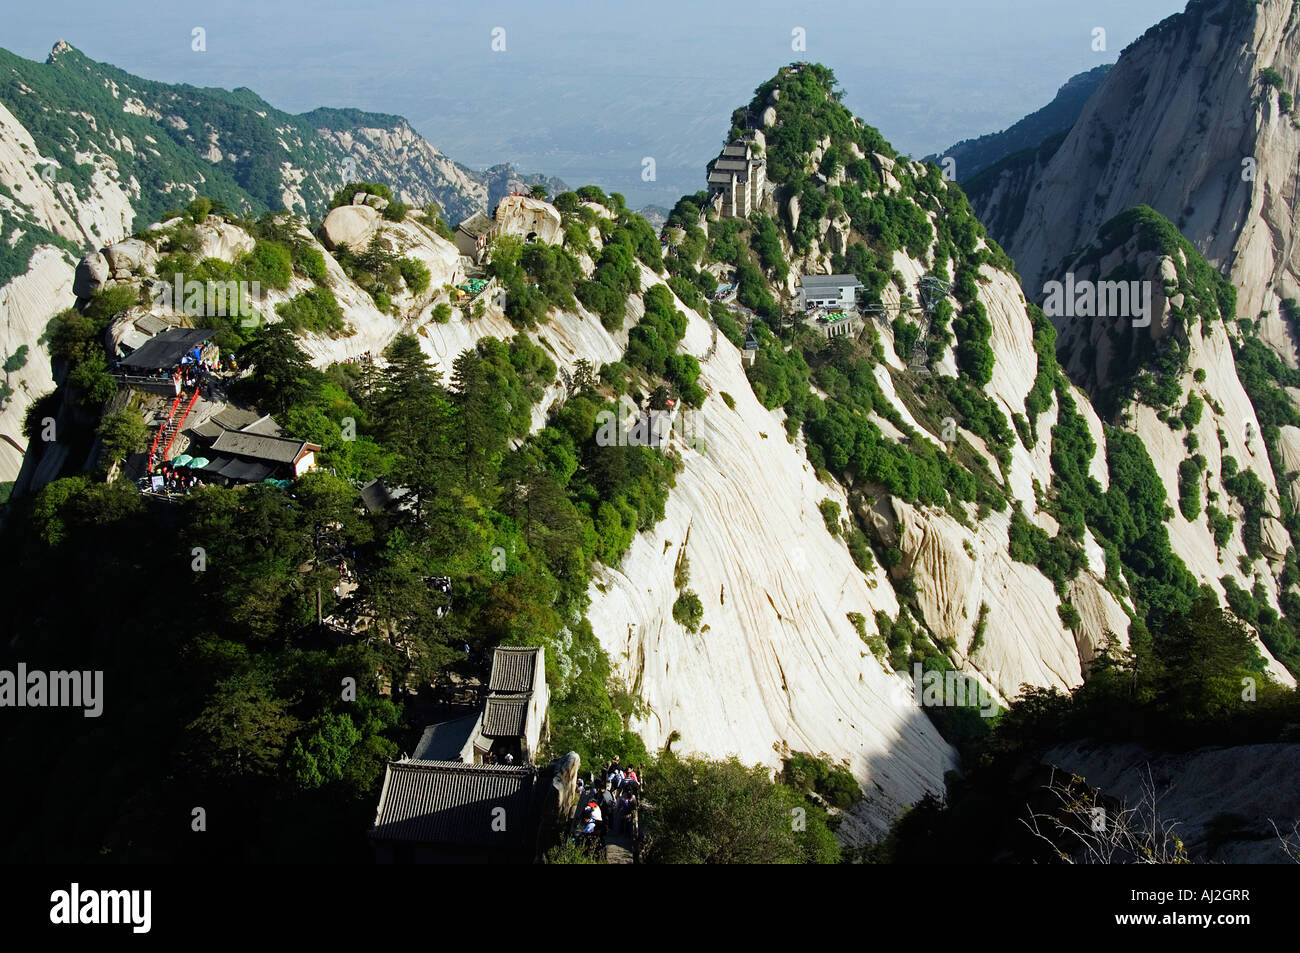 Hikers on a trail on Mount Hua, a granite peaked mountain (2160m) in the Shaanxi Province, China Stock Photo